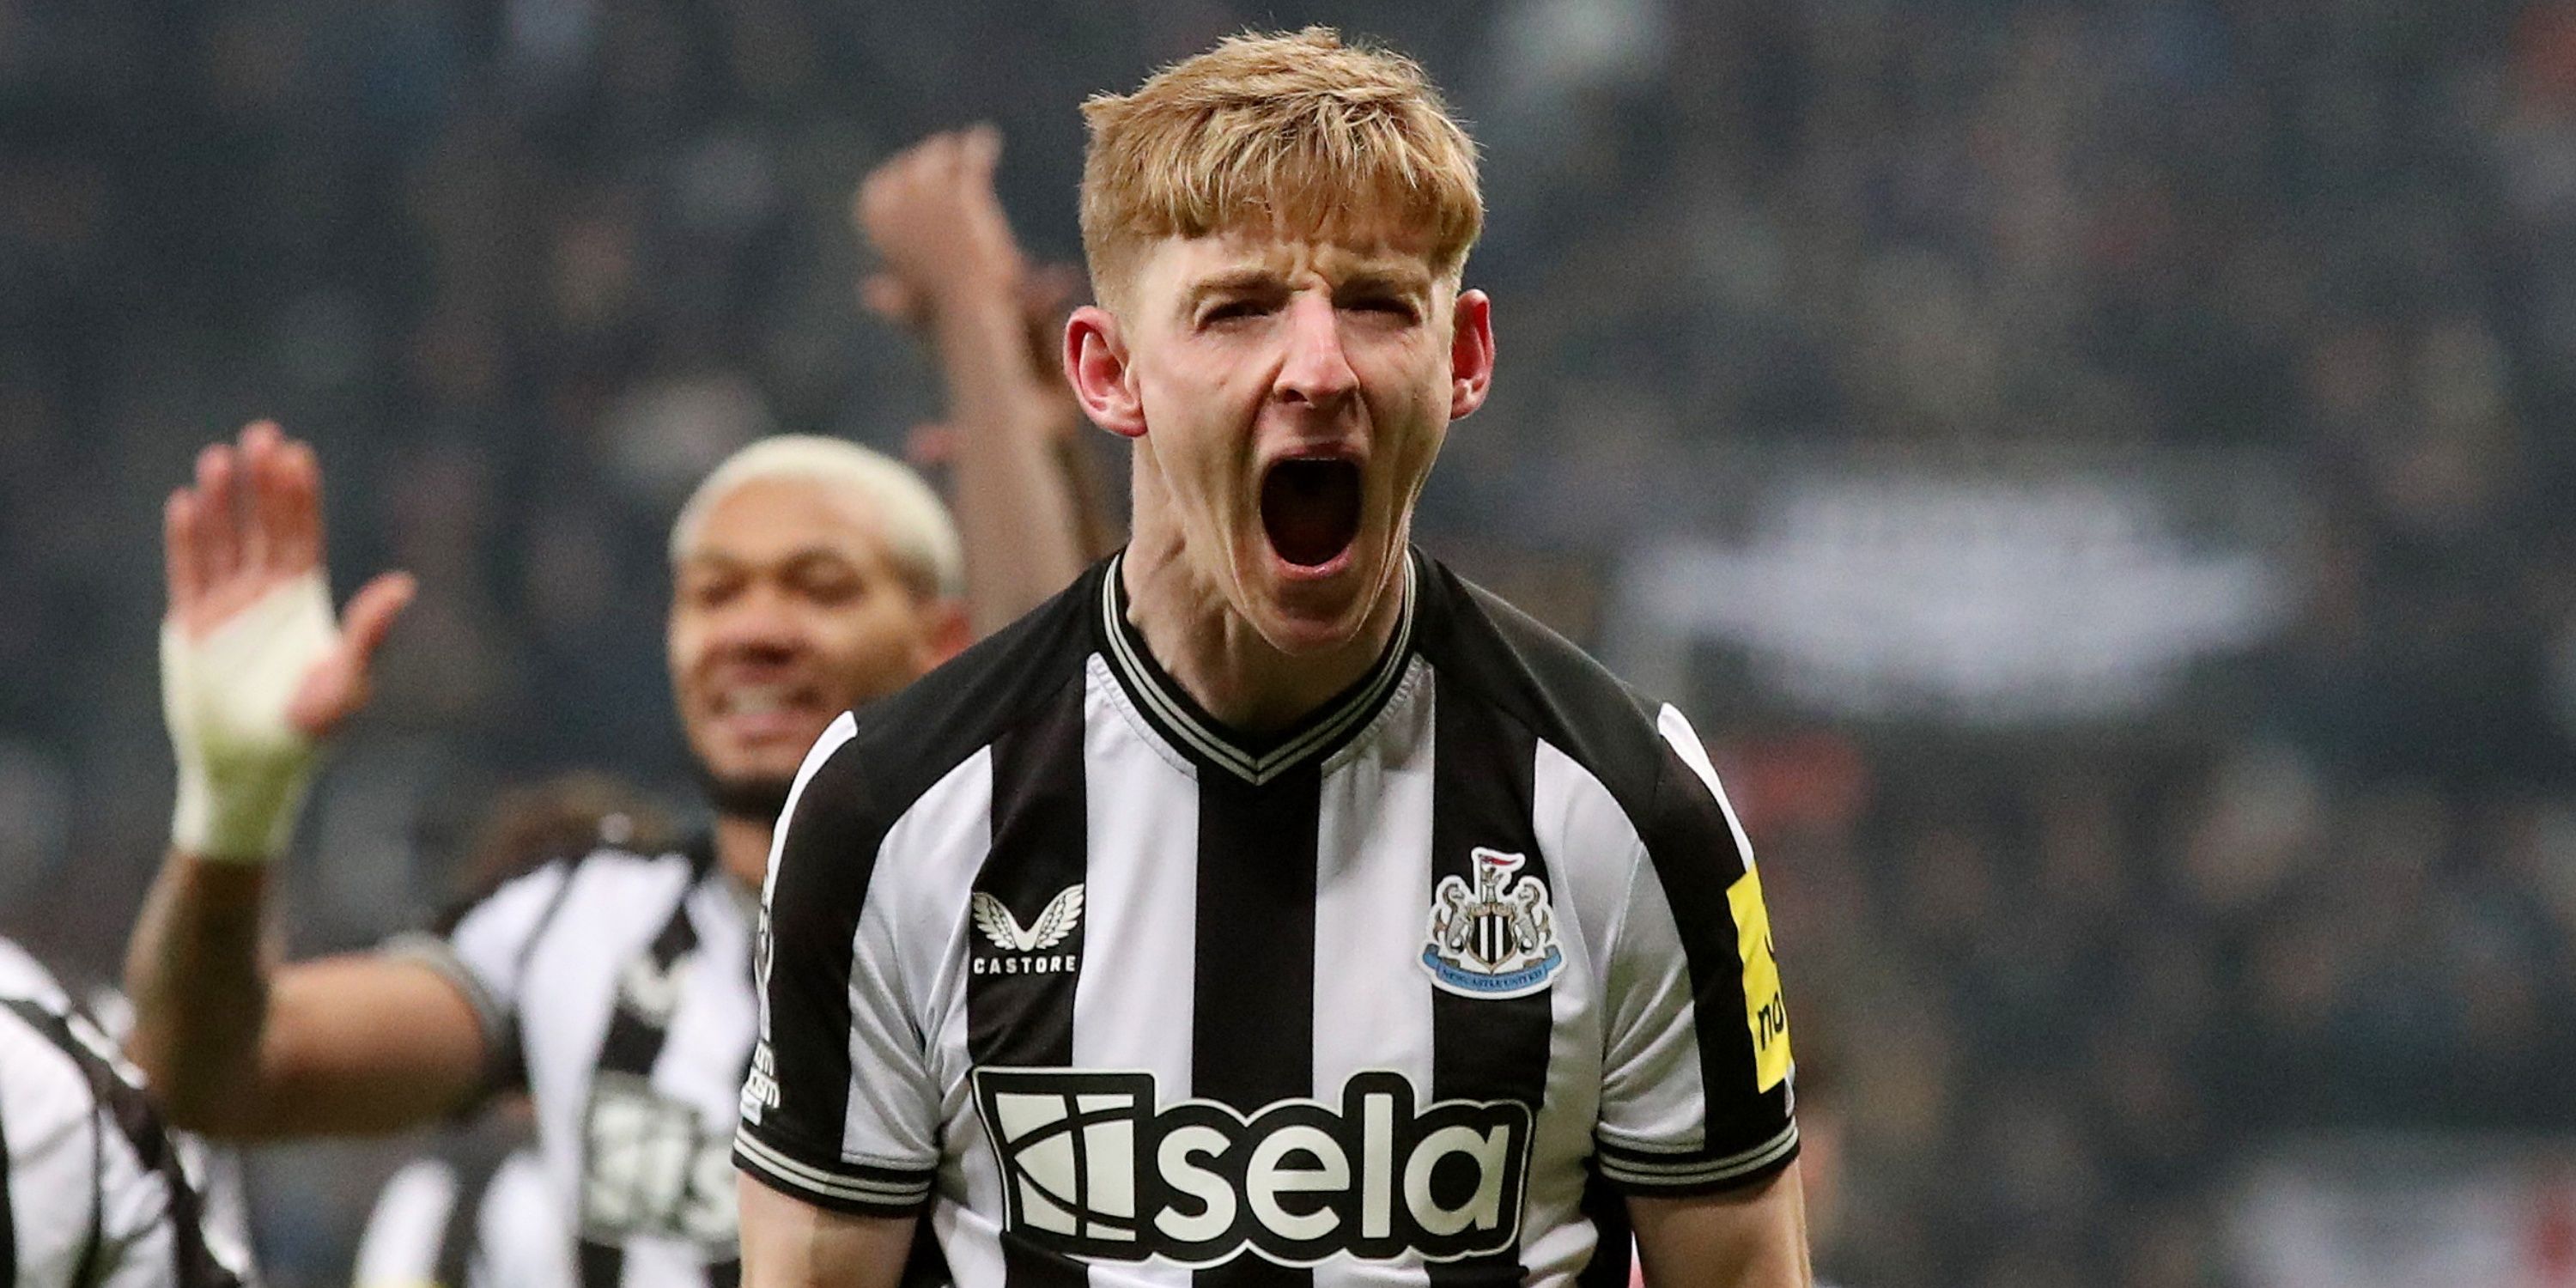 newcastle's £25m sale is outperforming gordon after leaving